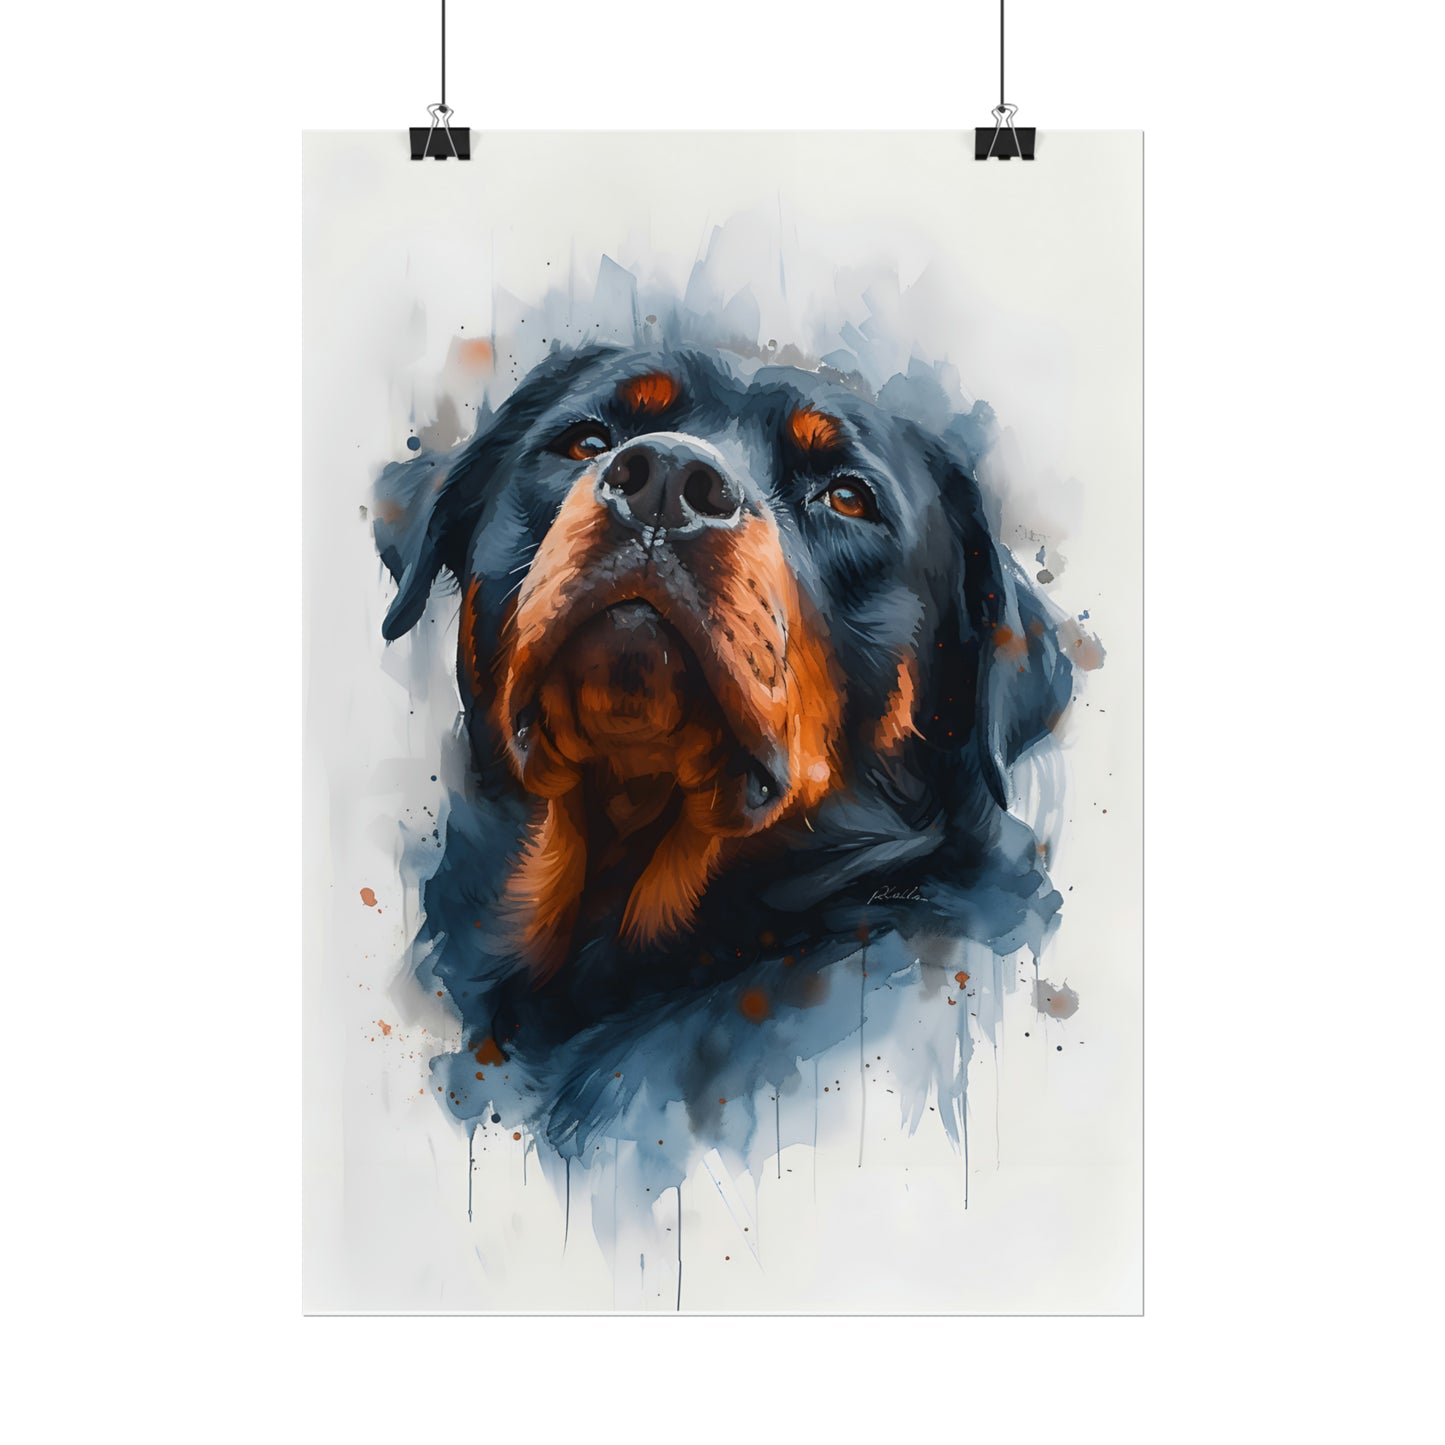 Rottweiler Watercolor Painting, Dog Portrait, Gift For Dog Lover, Rottweiler Wall Art, Emotional Support Dog, Home Decor, Dog Print